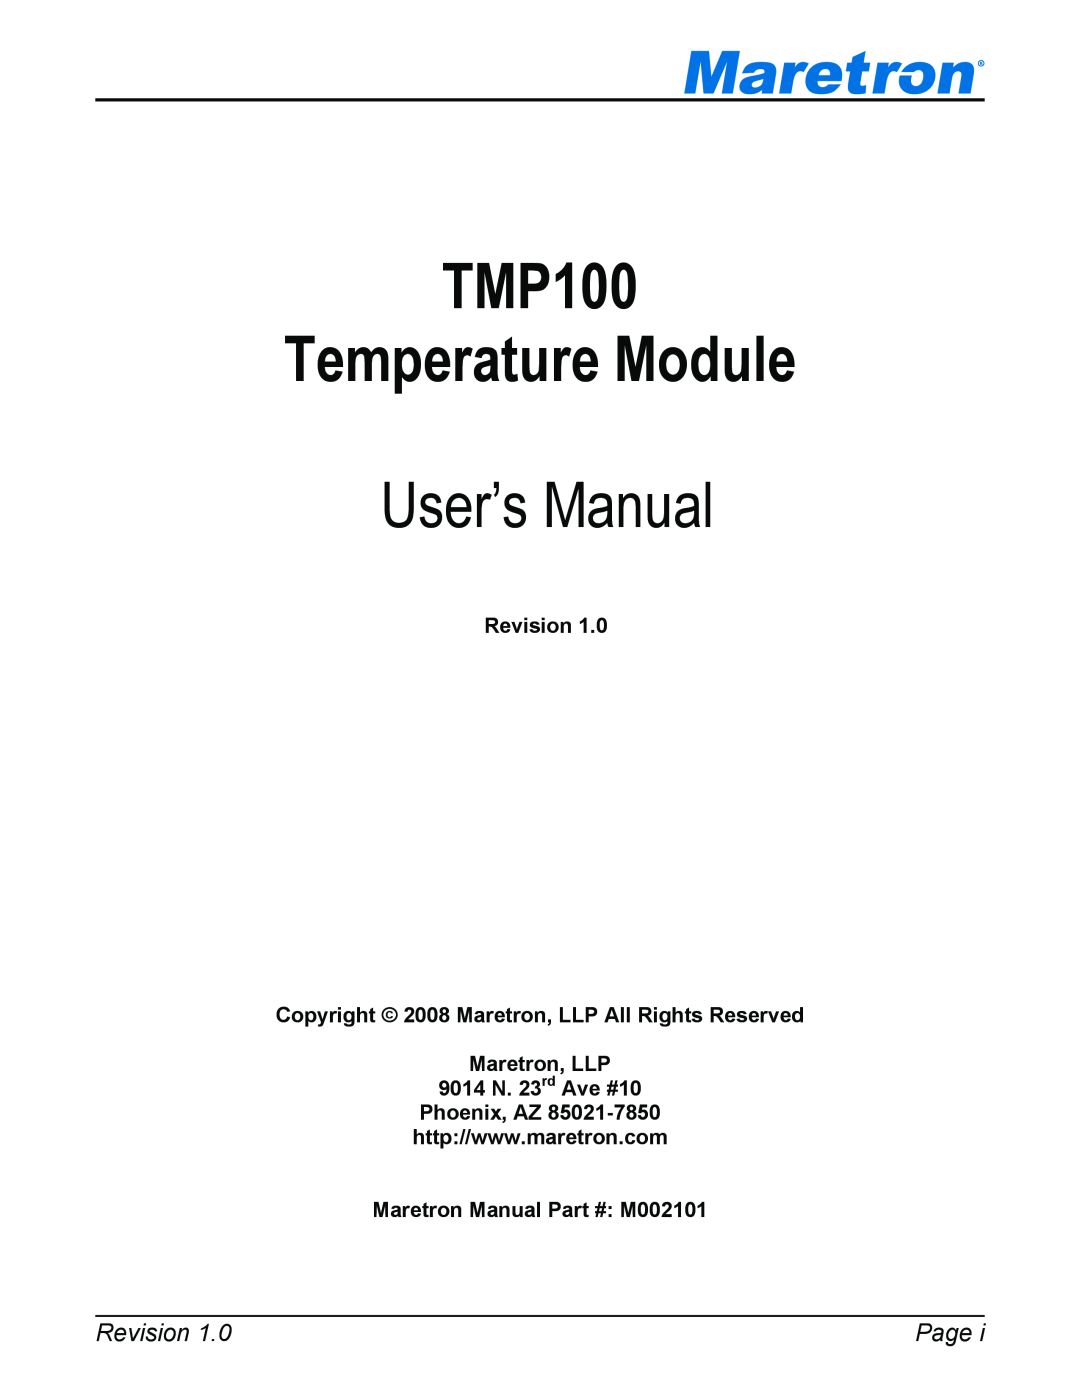 Maretron TP-EGT-1 user manual Page, Revision Copyright 2008 Maretron, LLP All Rights Reserved, Maretron Manual M002101 